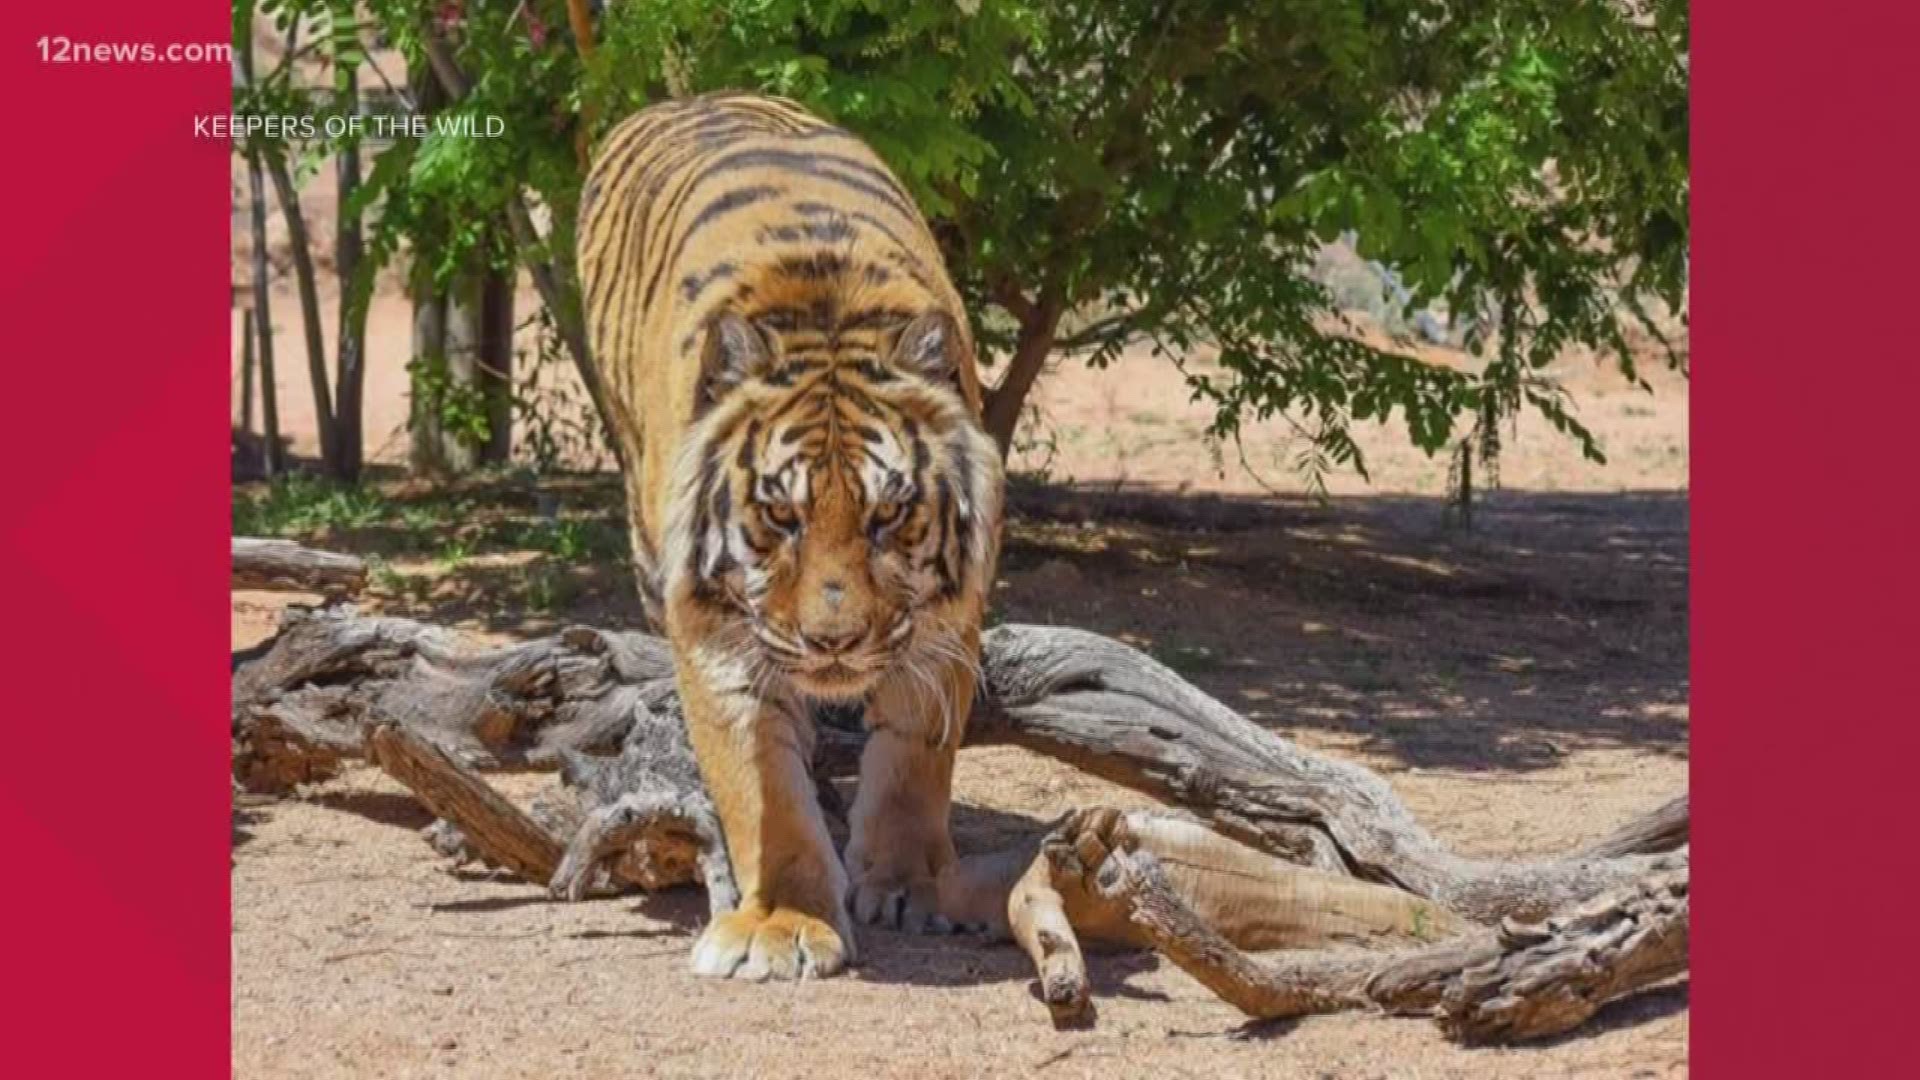 The founder of the Keepers of the Wild animal sanctuary and nature park was hospitalized with two broken bones and multiple other wounds after being attacked by a tiger on Monday.